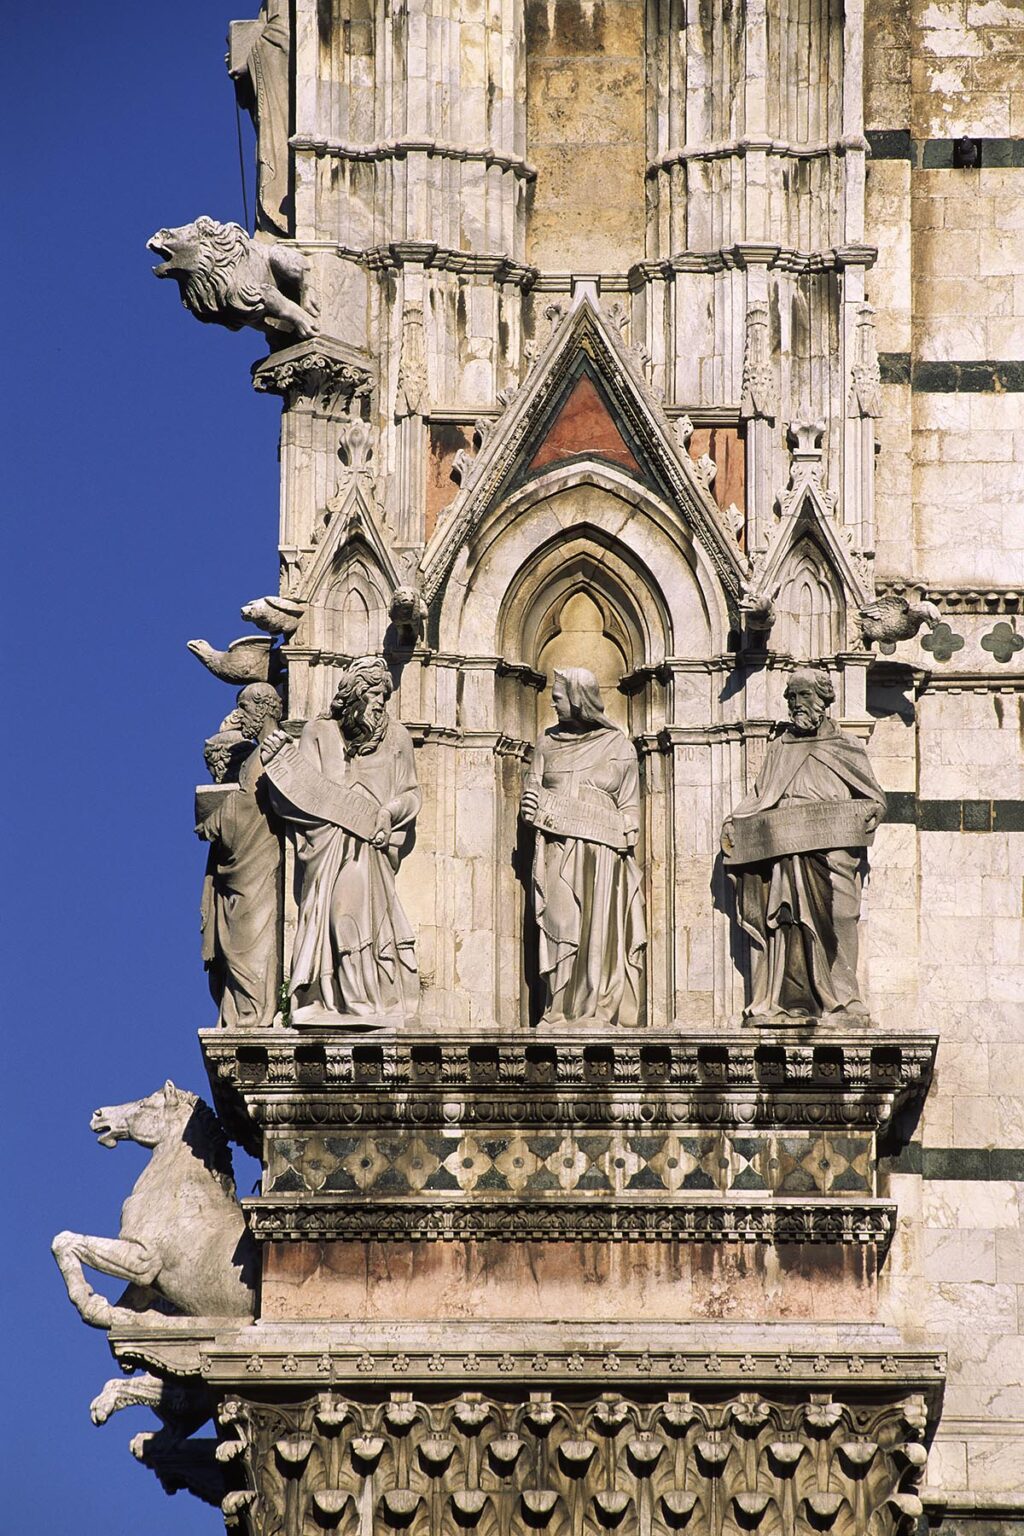 Carved marble Saints and winged Lion & Bull decorate the ornate facade of  SIENA'S CATHEDRAL begun in 1196 AD - TUSCANY, ITALY